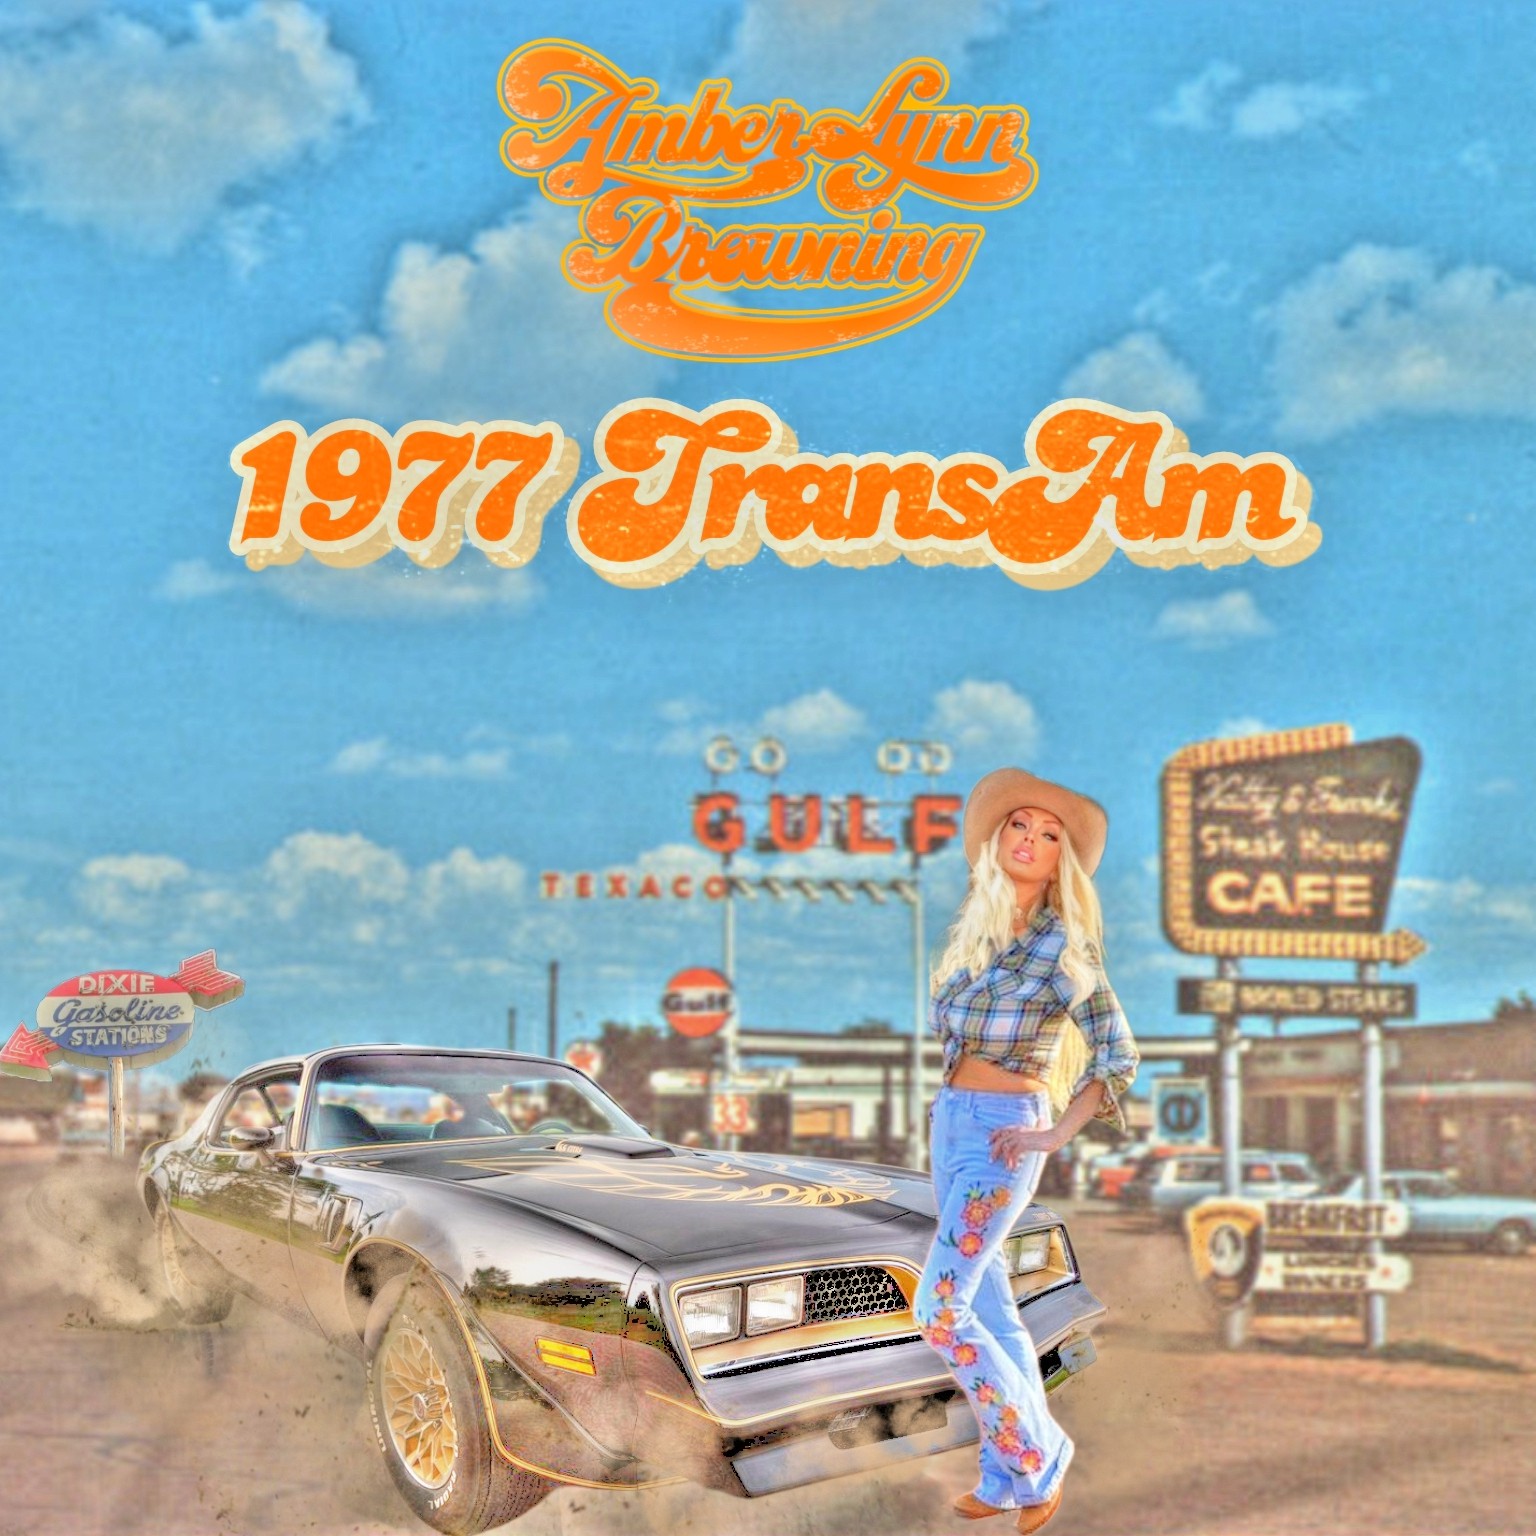 Amberlynn Browning Revs Up the Music Scene with Her Electrifying New Track “1977 Transam”